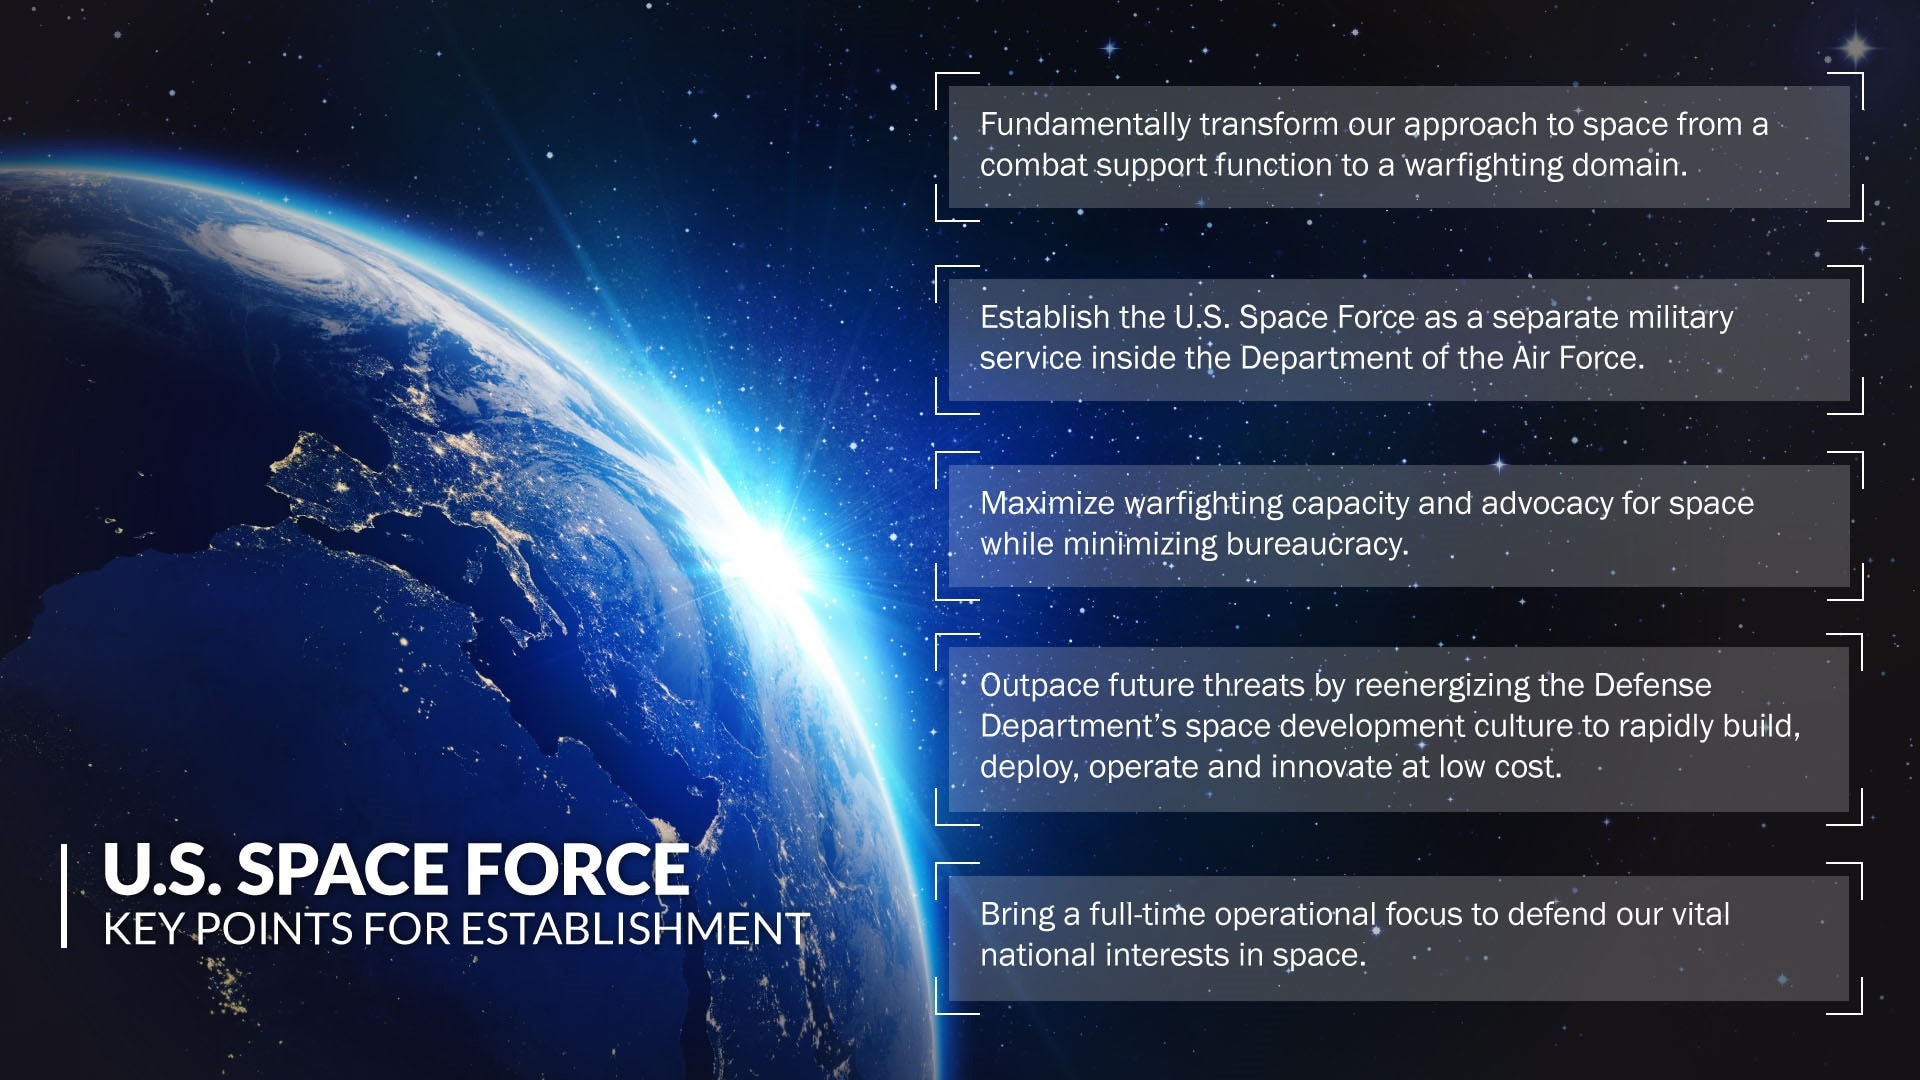 Five key points for establishment of the Space Force.